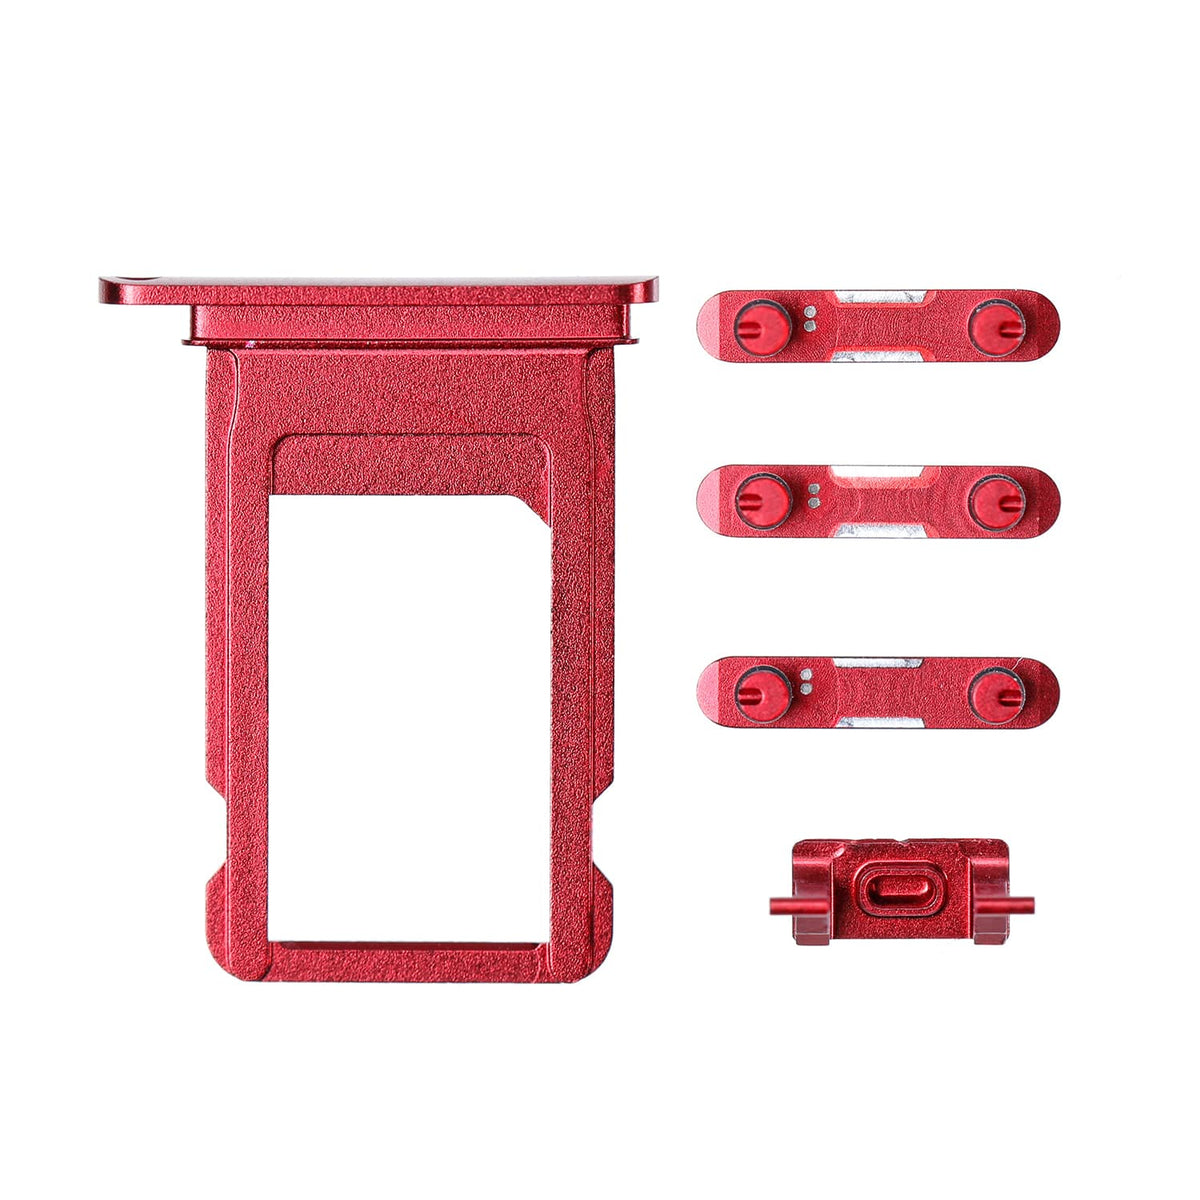 RED SIDE BUTTONS SET WITH SIM TRAY FOR IPHONE 8/SE 2ND/SE 3RD